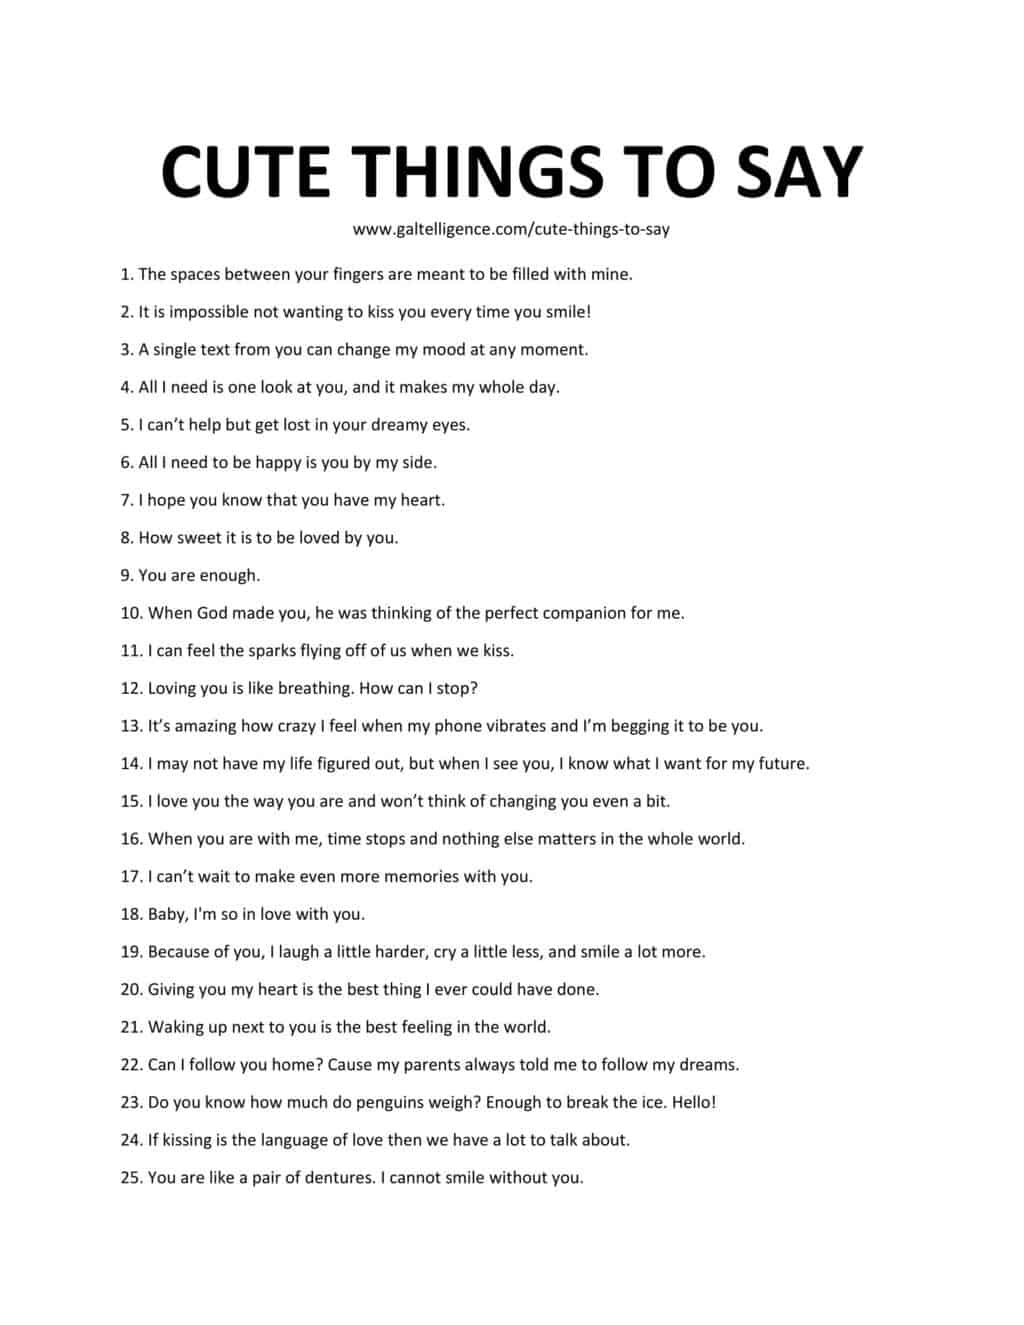 To cute a things friend to say 180+ Cute